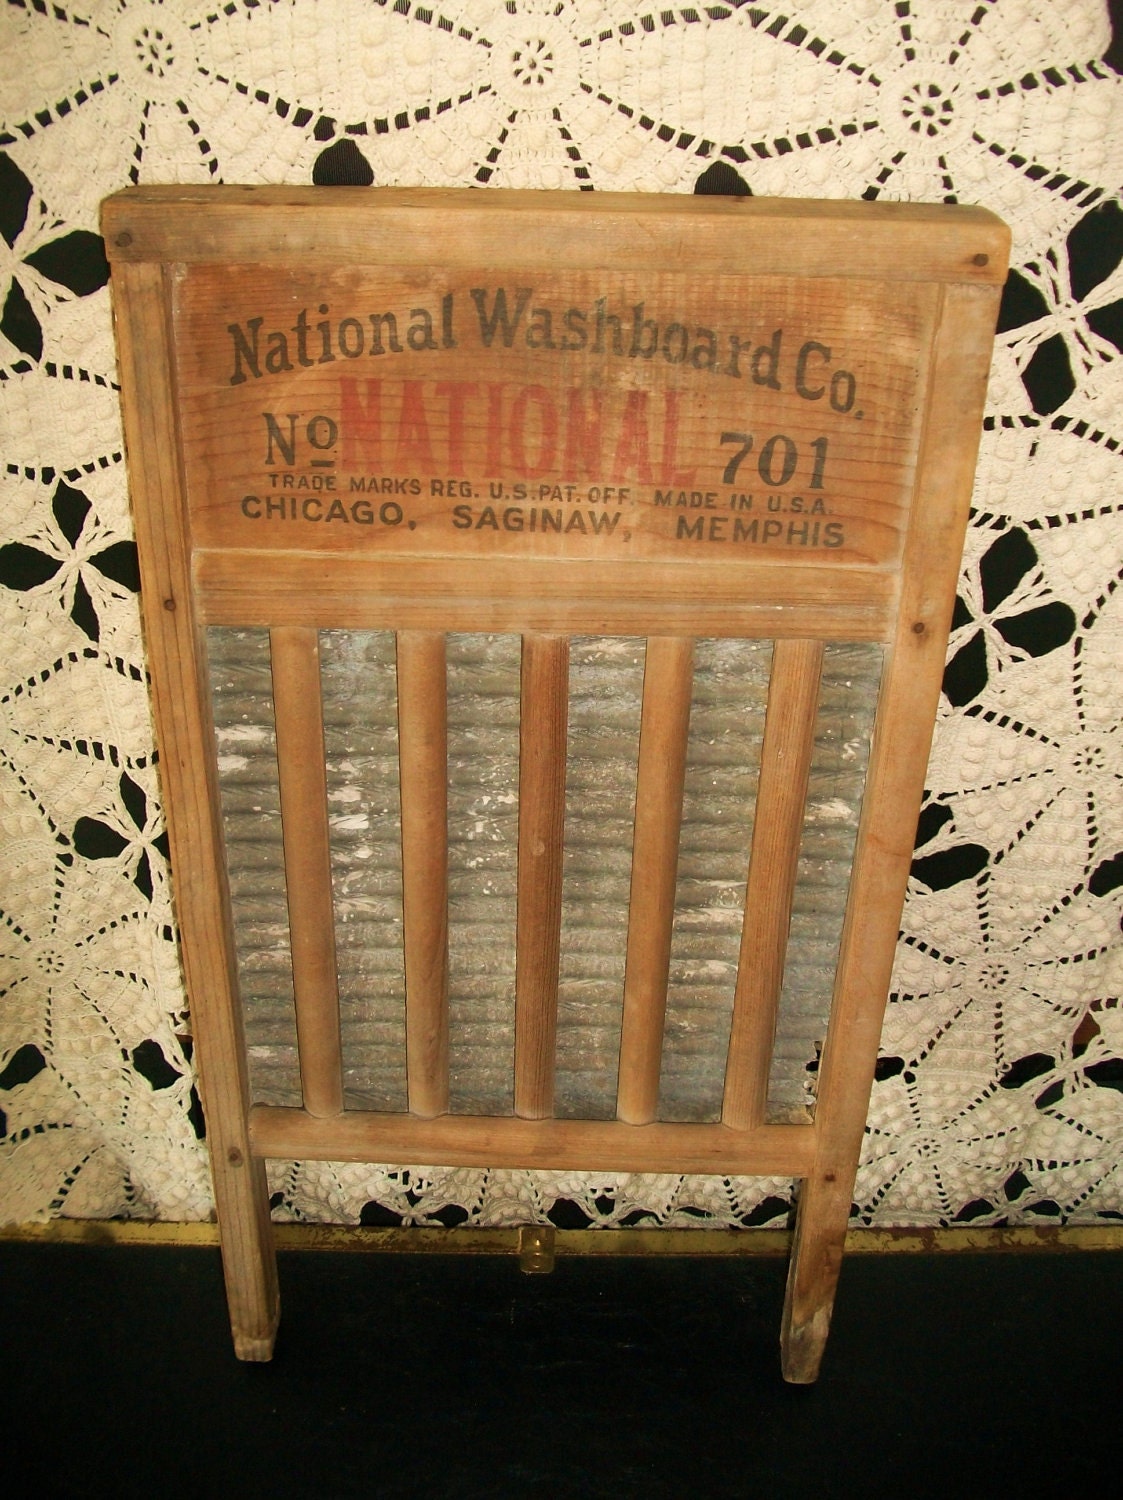 Antique National Washboard Co No 701 by LaHaDans on Etsy